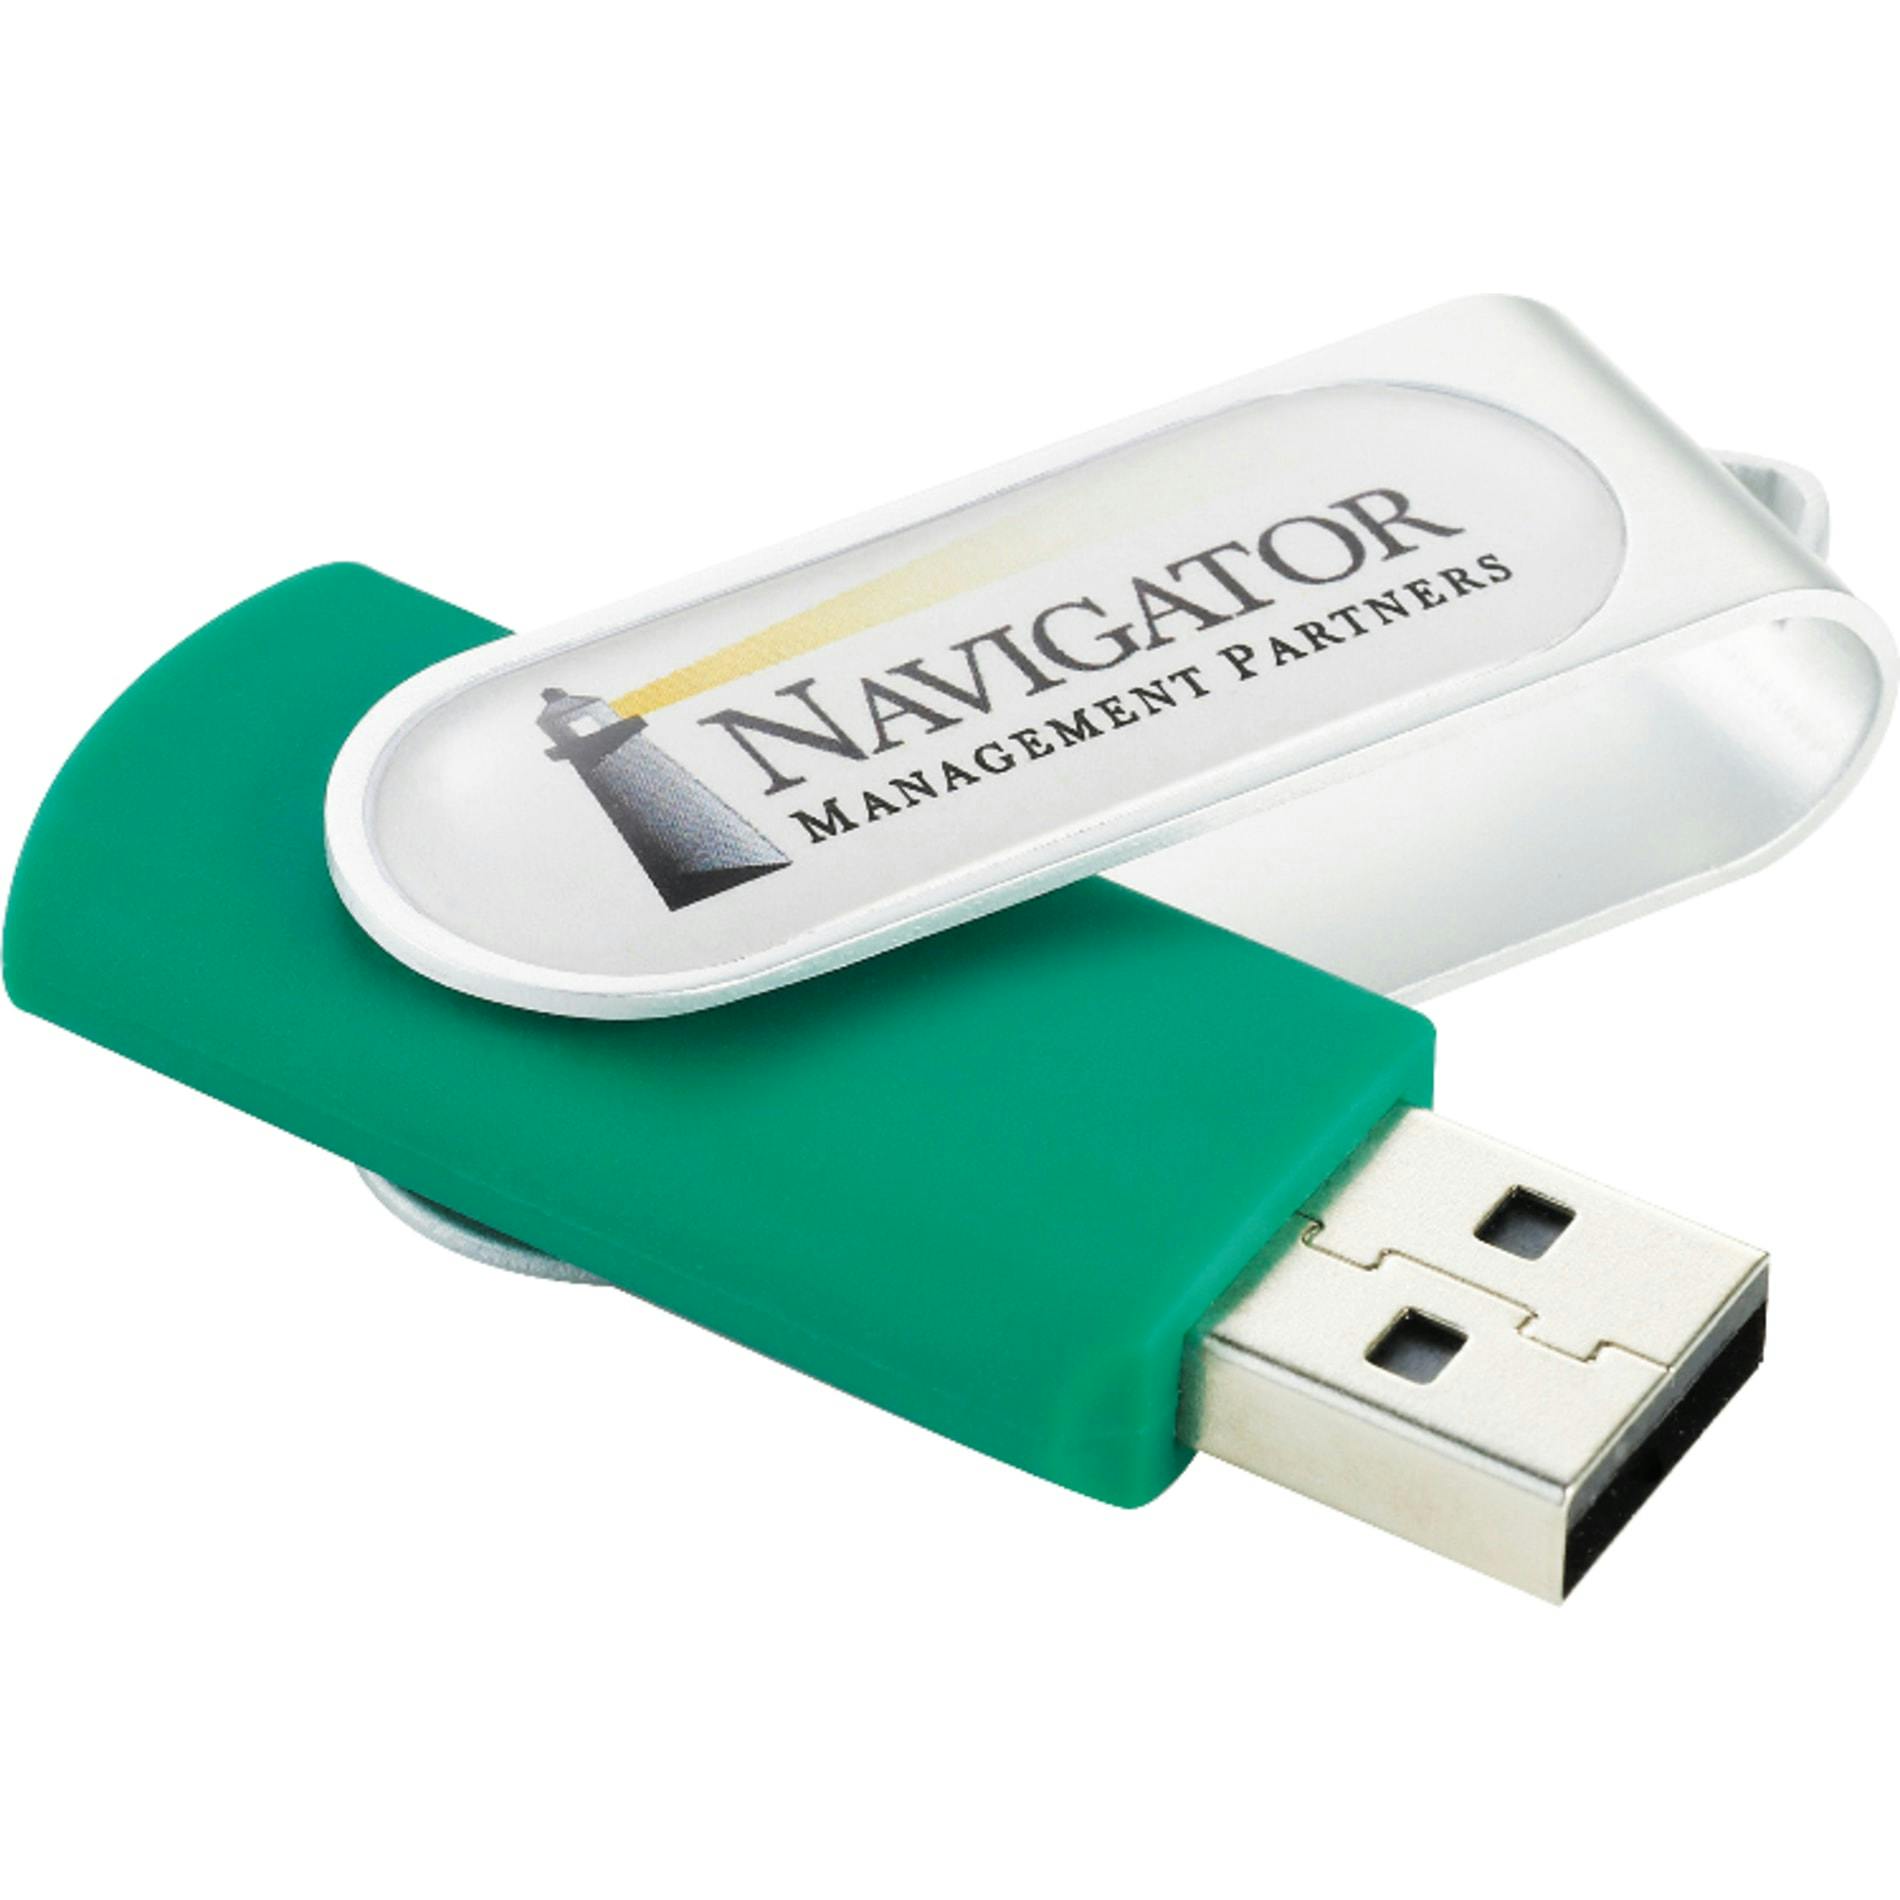 Domeable Rotate Flash Drive 1GB - additional Image 1